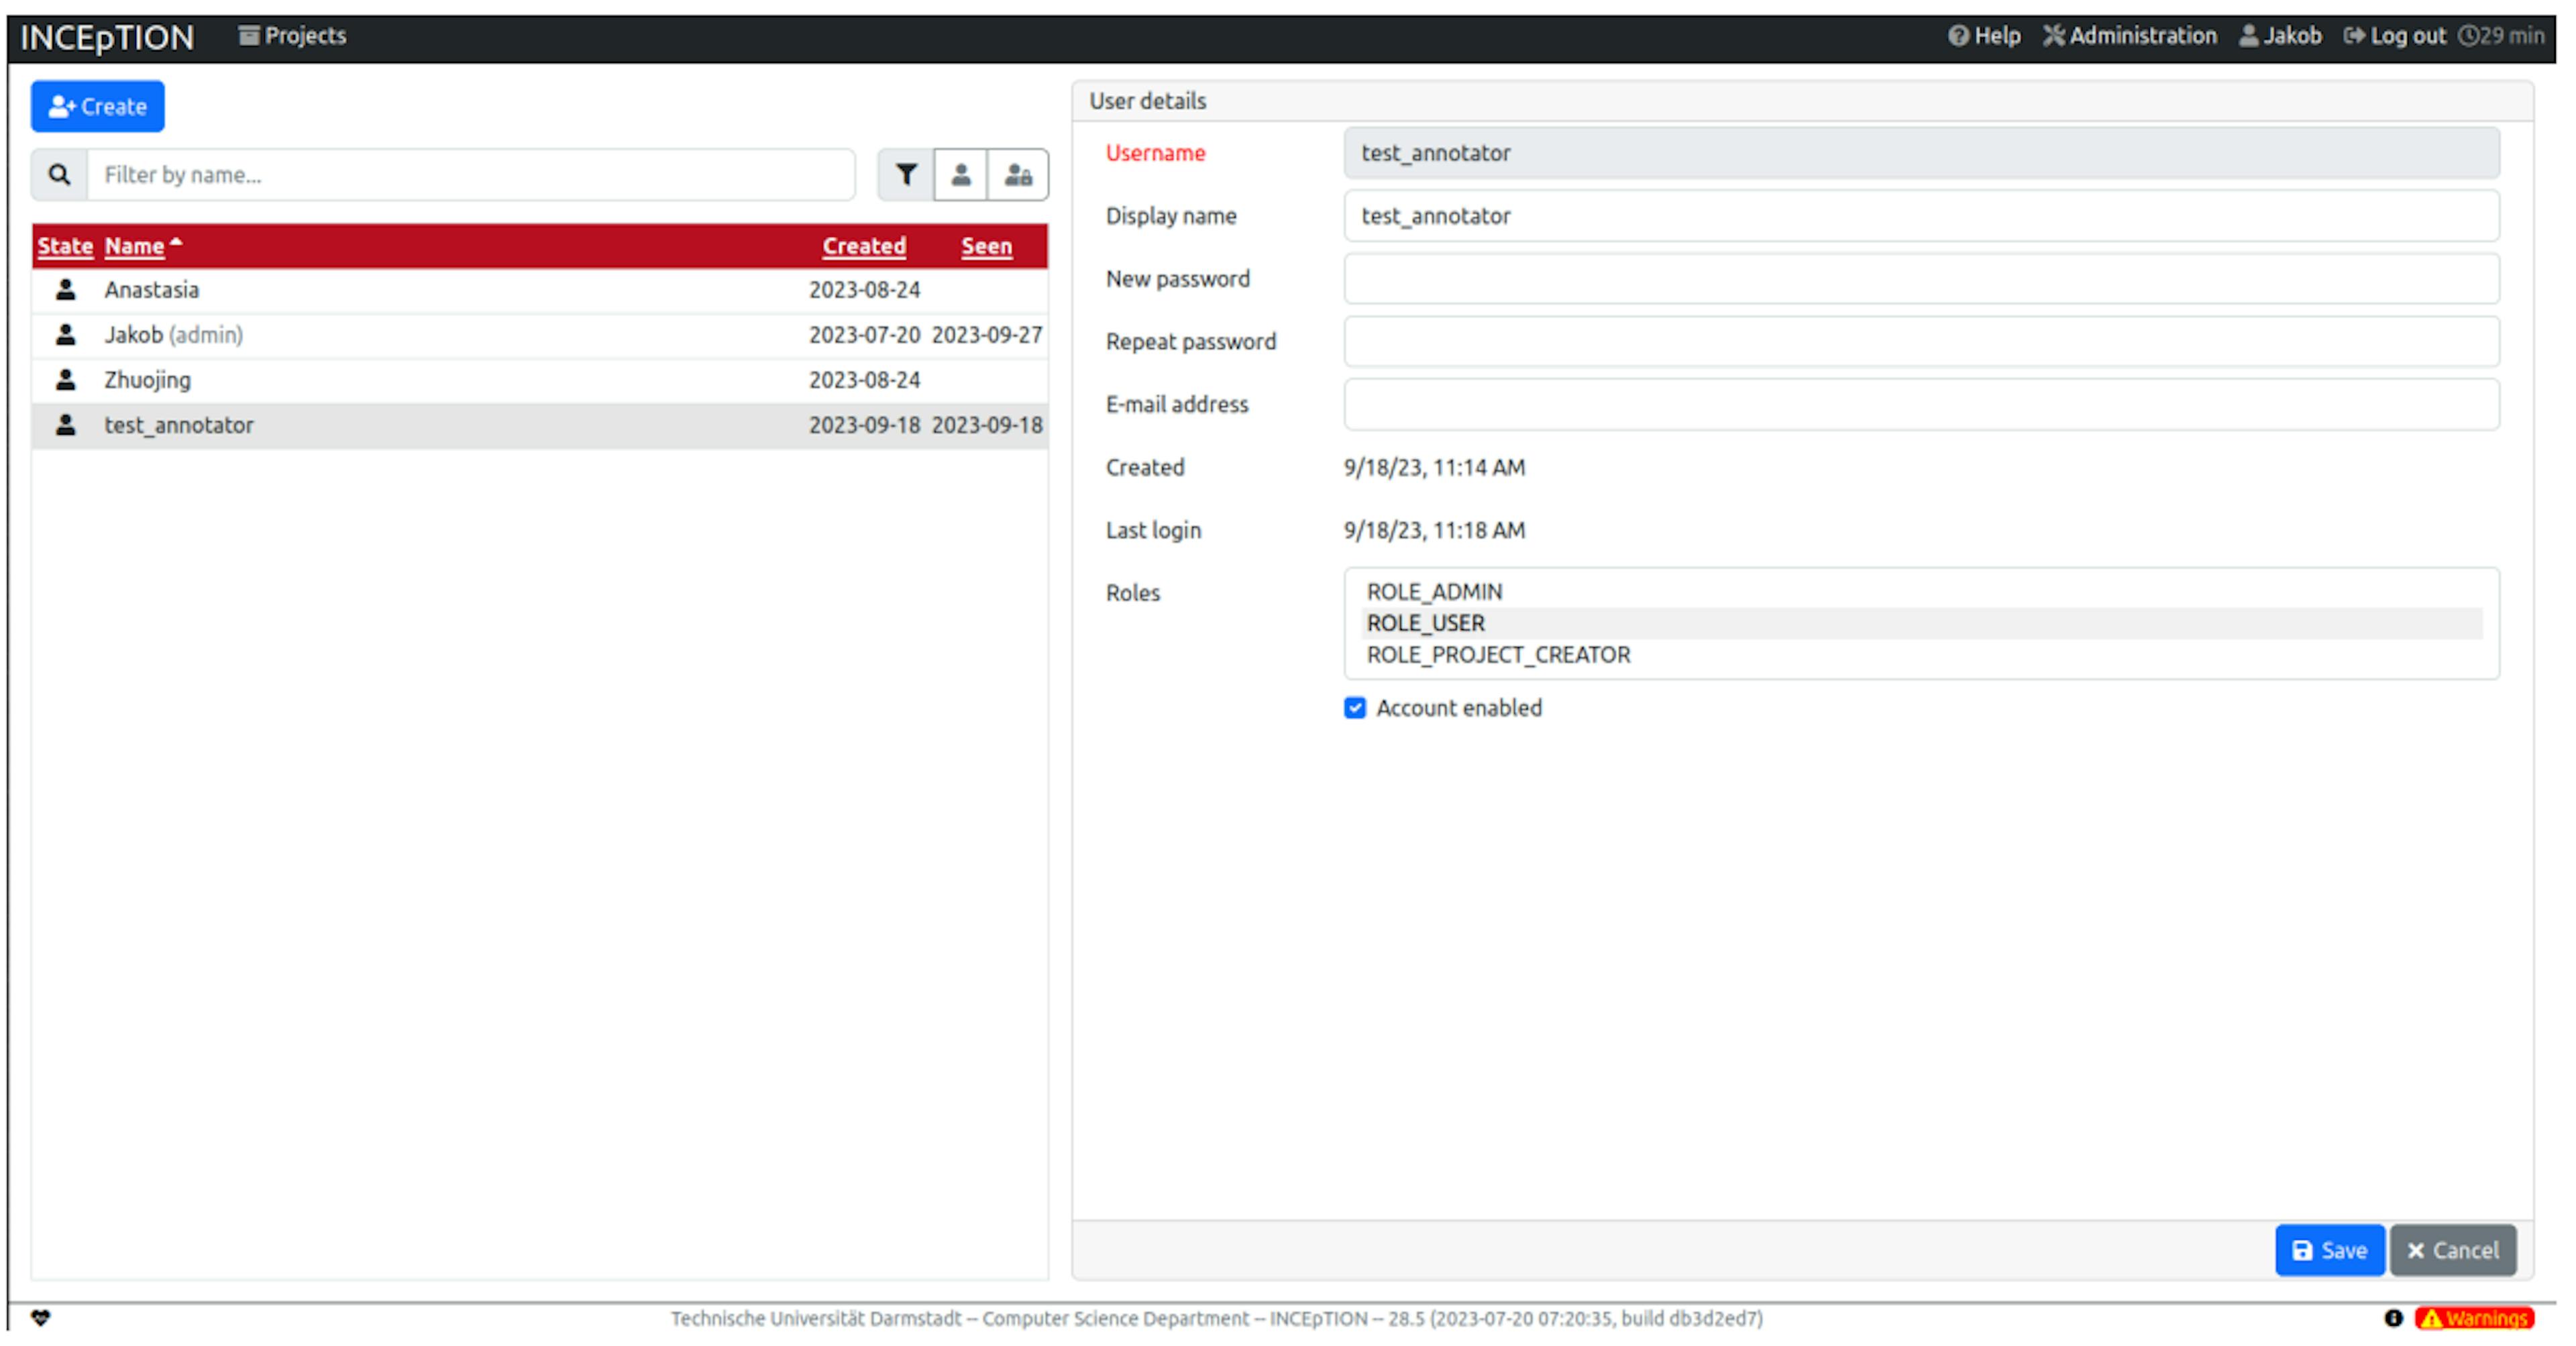 Figure 3: Screenshot of Inception window showing the user management settings. Make sure to create or activate your own user account here at first login.